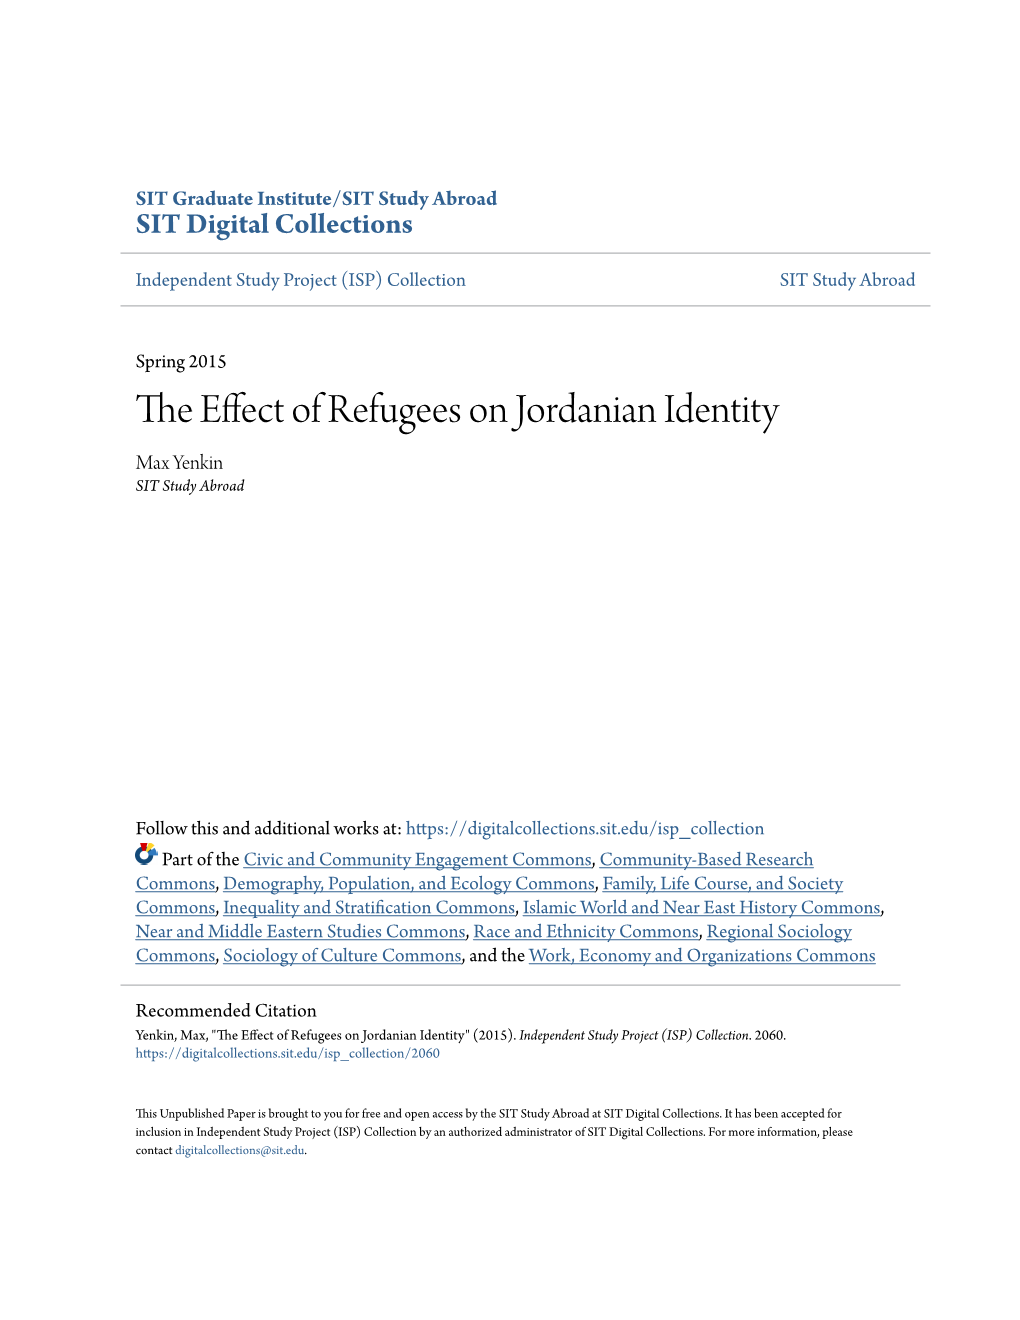 The Effect of Refugees on Jordanian Identity" (2015)